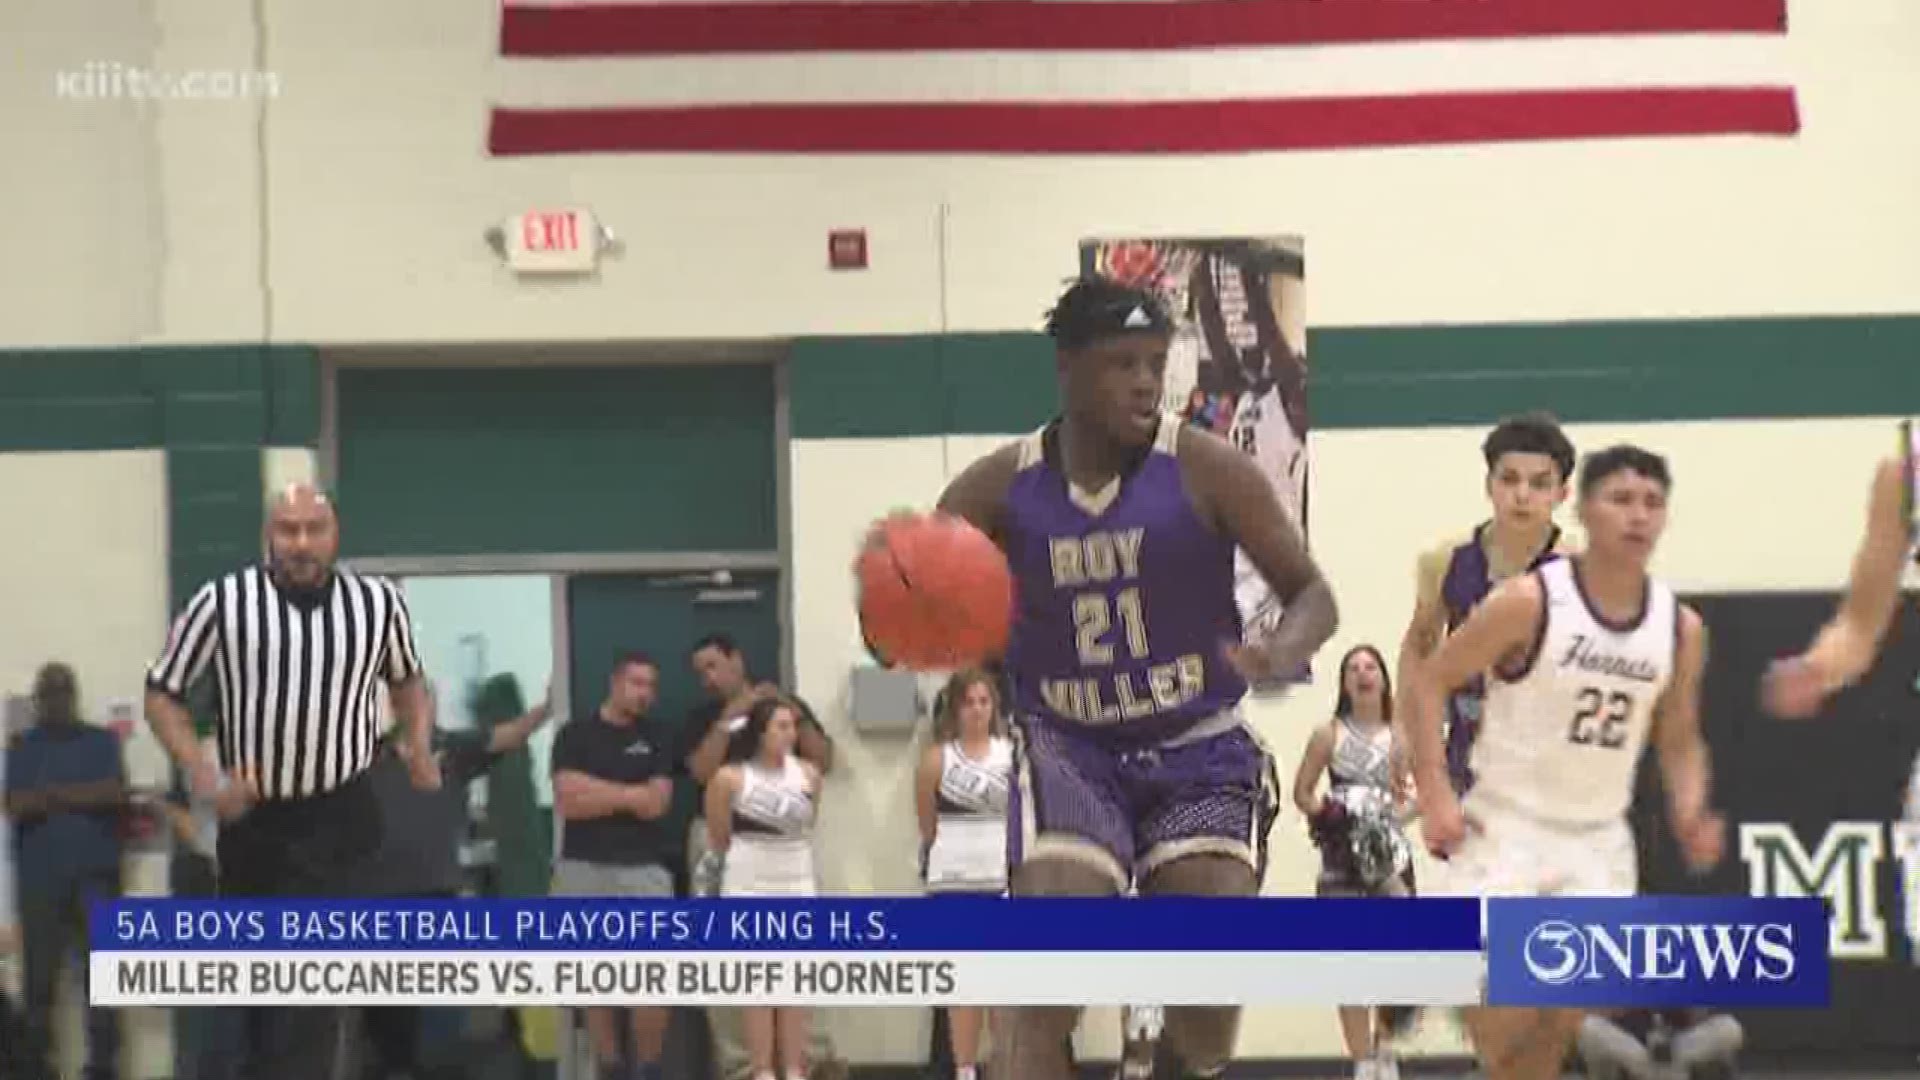 Miller boys basketball came from behind to top Flour Bluff in the Bi-District round 73-69. Catch the highlights and scores from Tuesday night here.